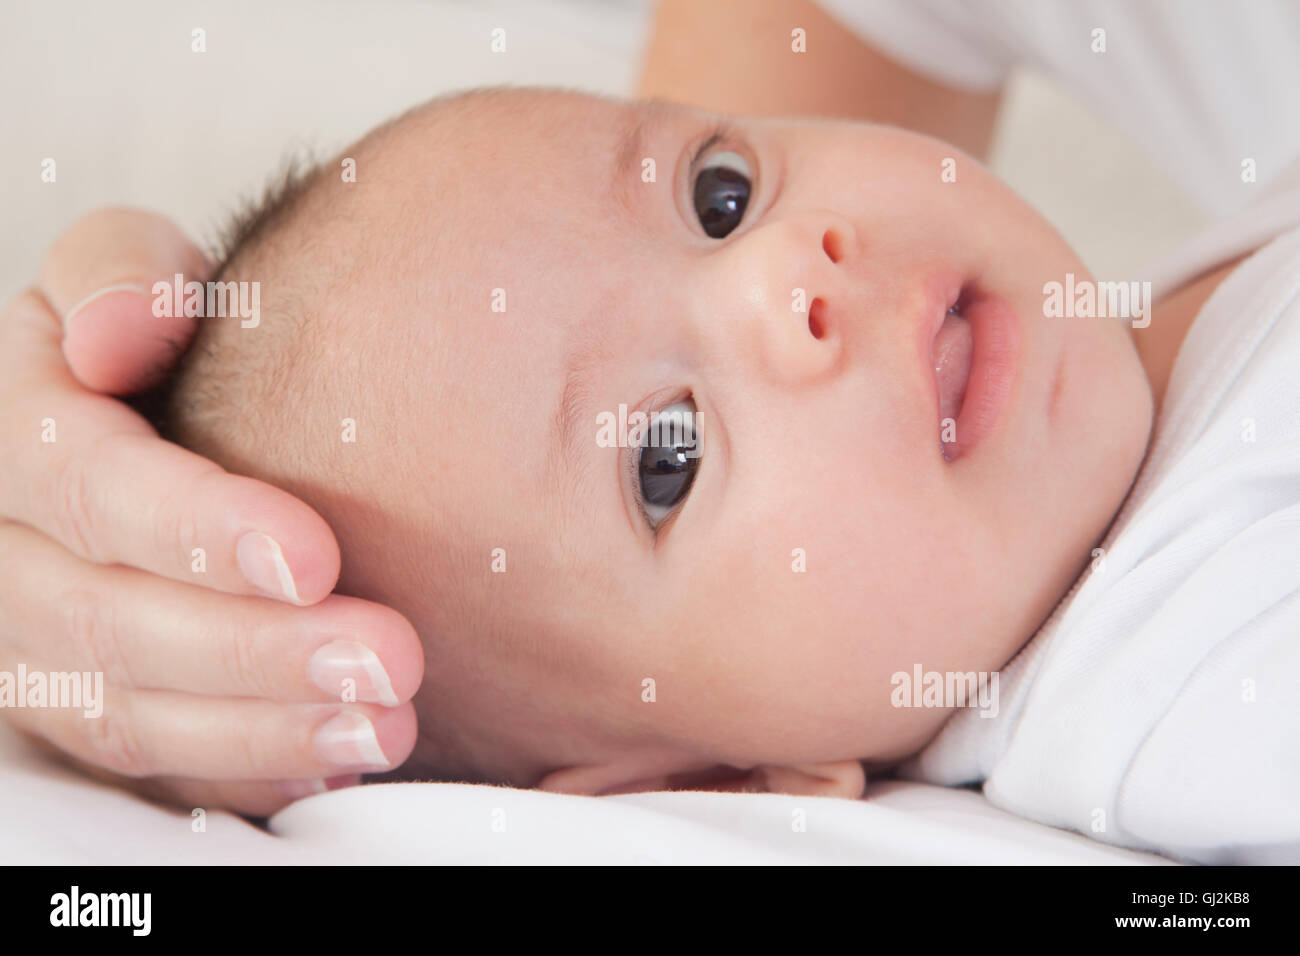 Mothers hand soothing baby boy Stock Photo